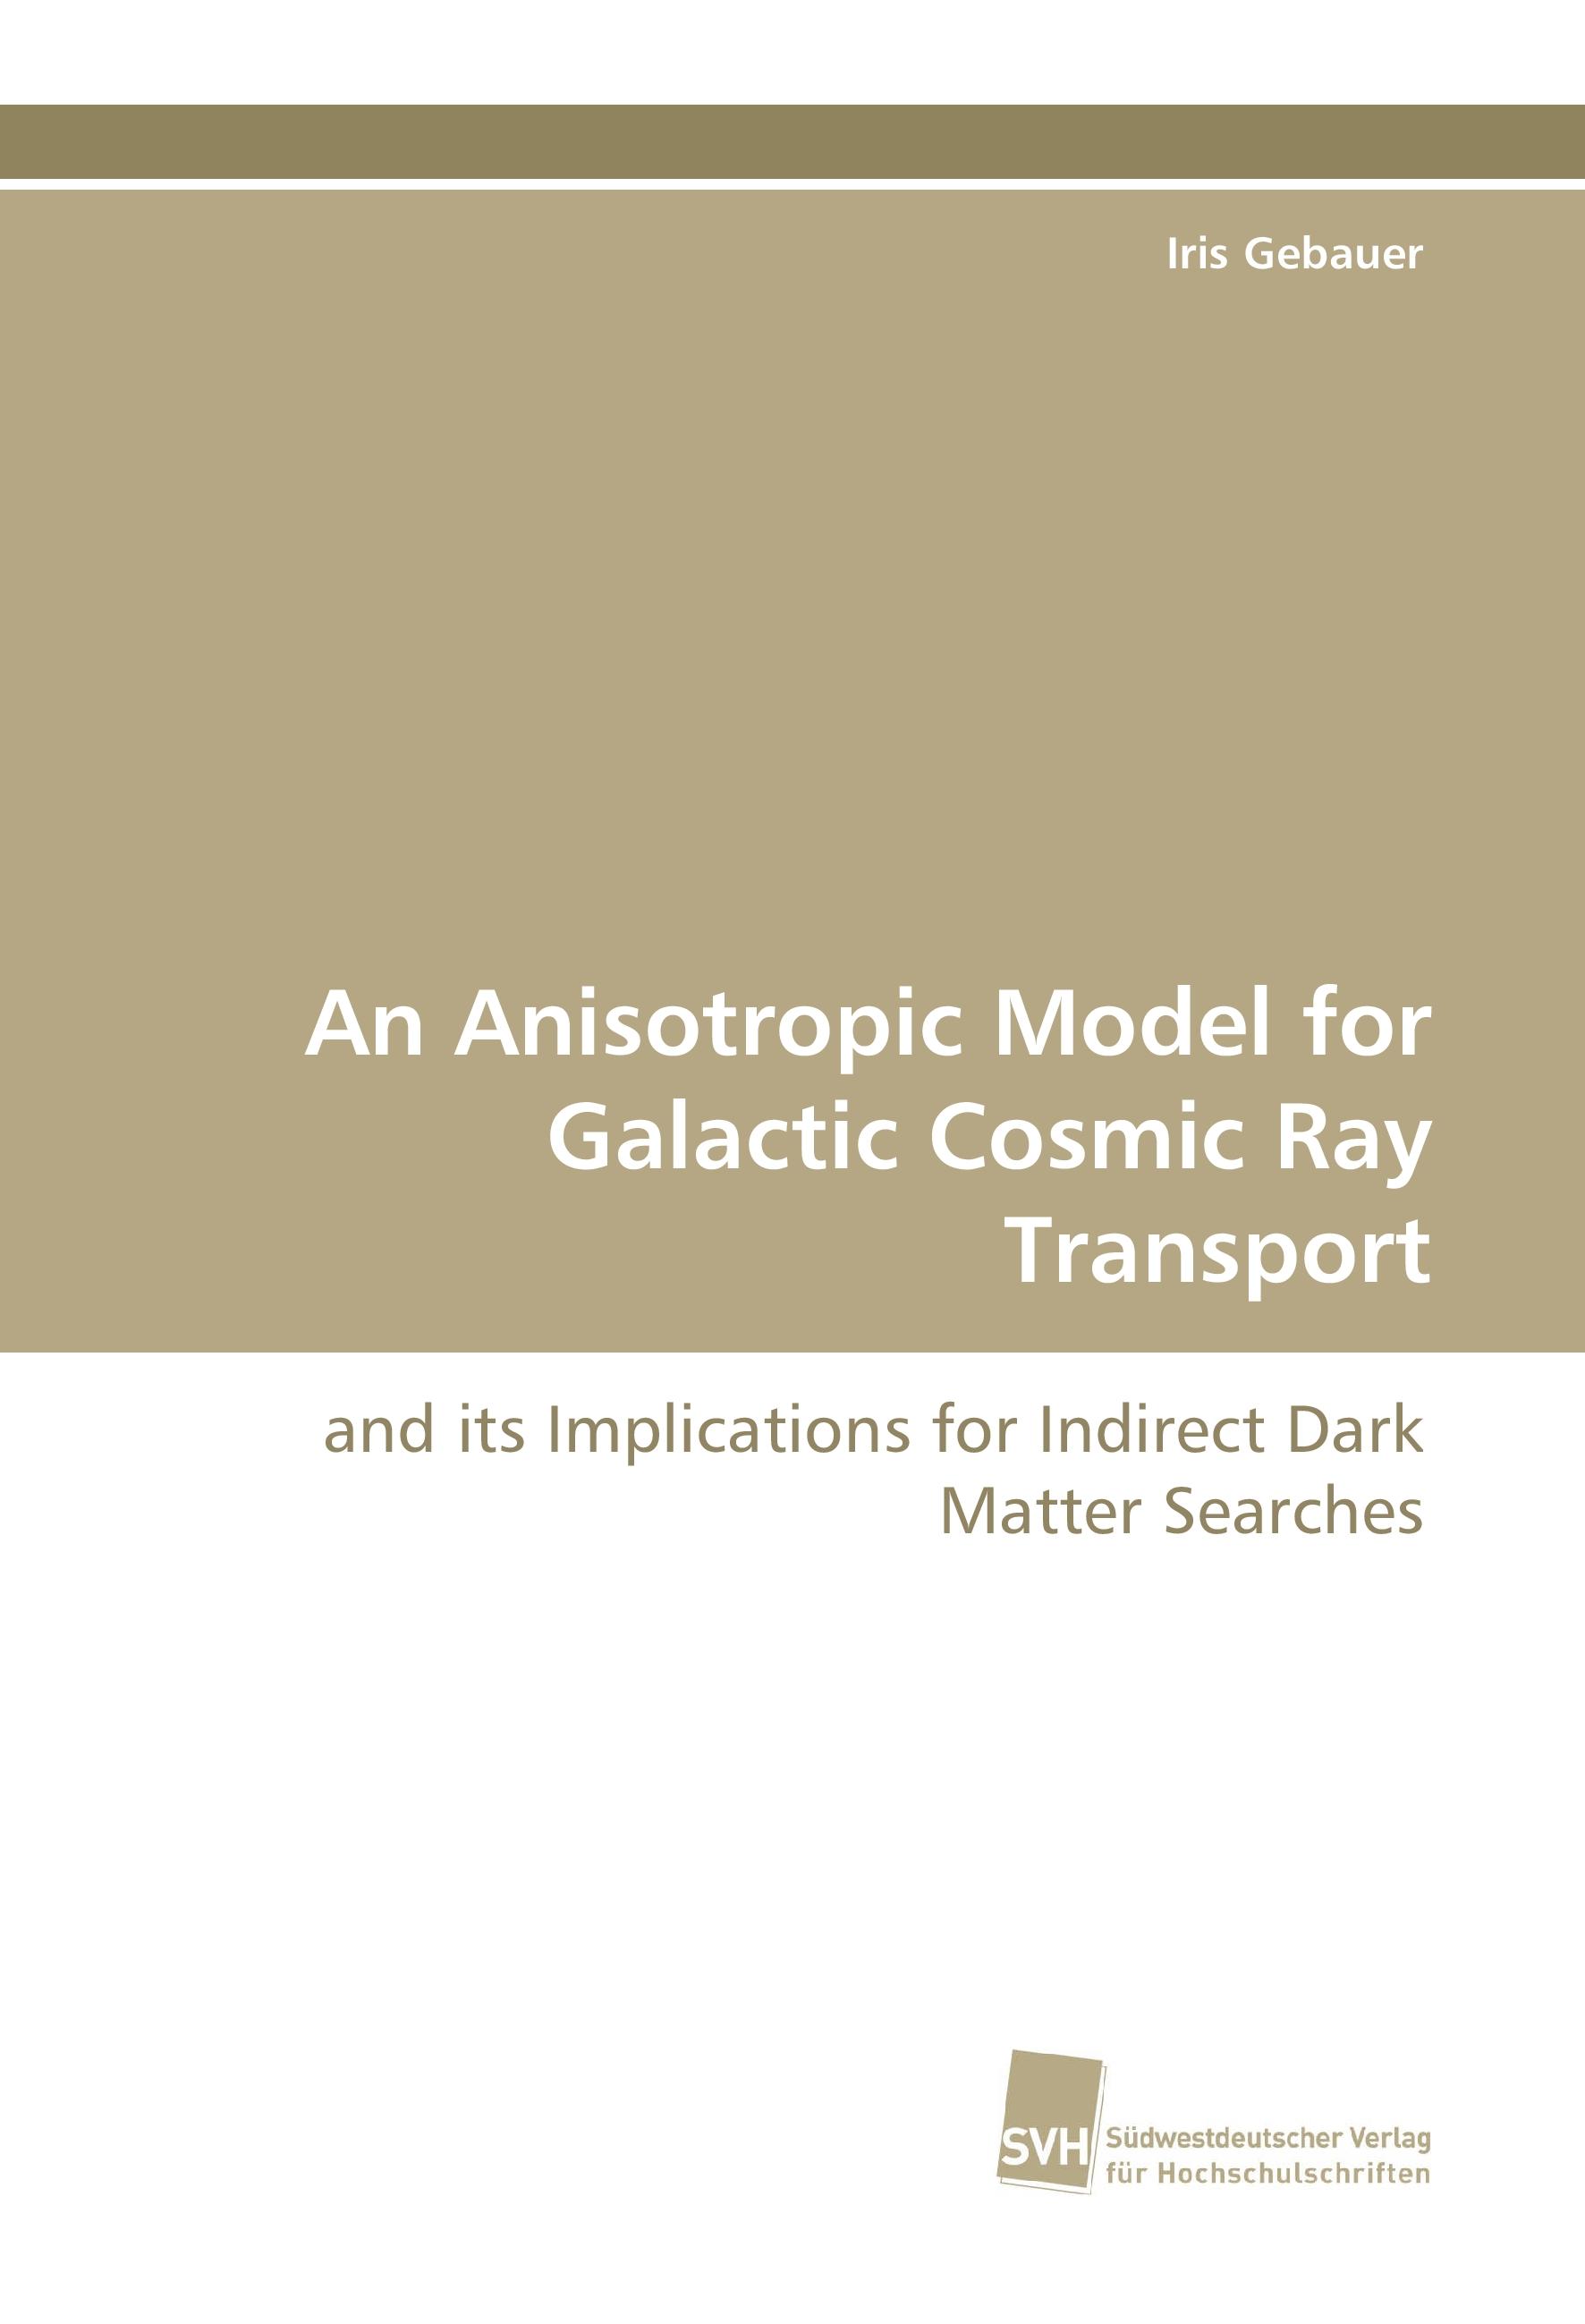 An Anisotropic Model for Galactic Cosmic Ray Transport / and its Implications for Indirect Dark Matter Searches / Iris Gebauer / Taschenbuch / Paperback / 244 S. / Englisch / 2015 / EAN 9783838115290 - Gebauer, Iris